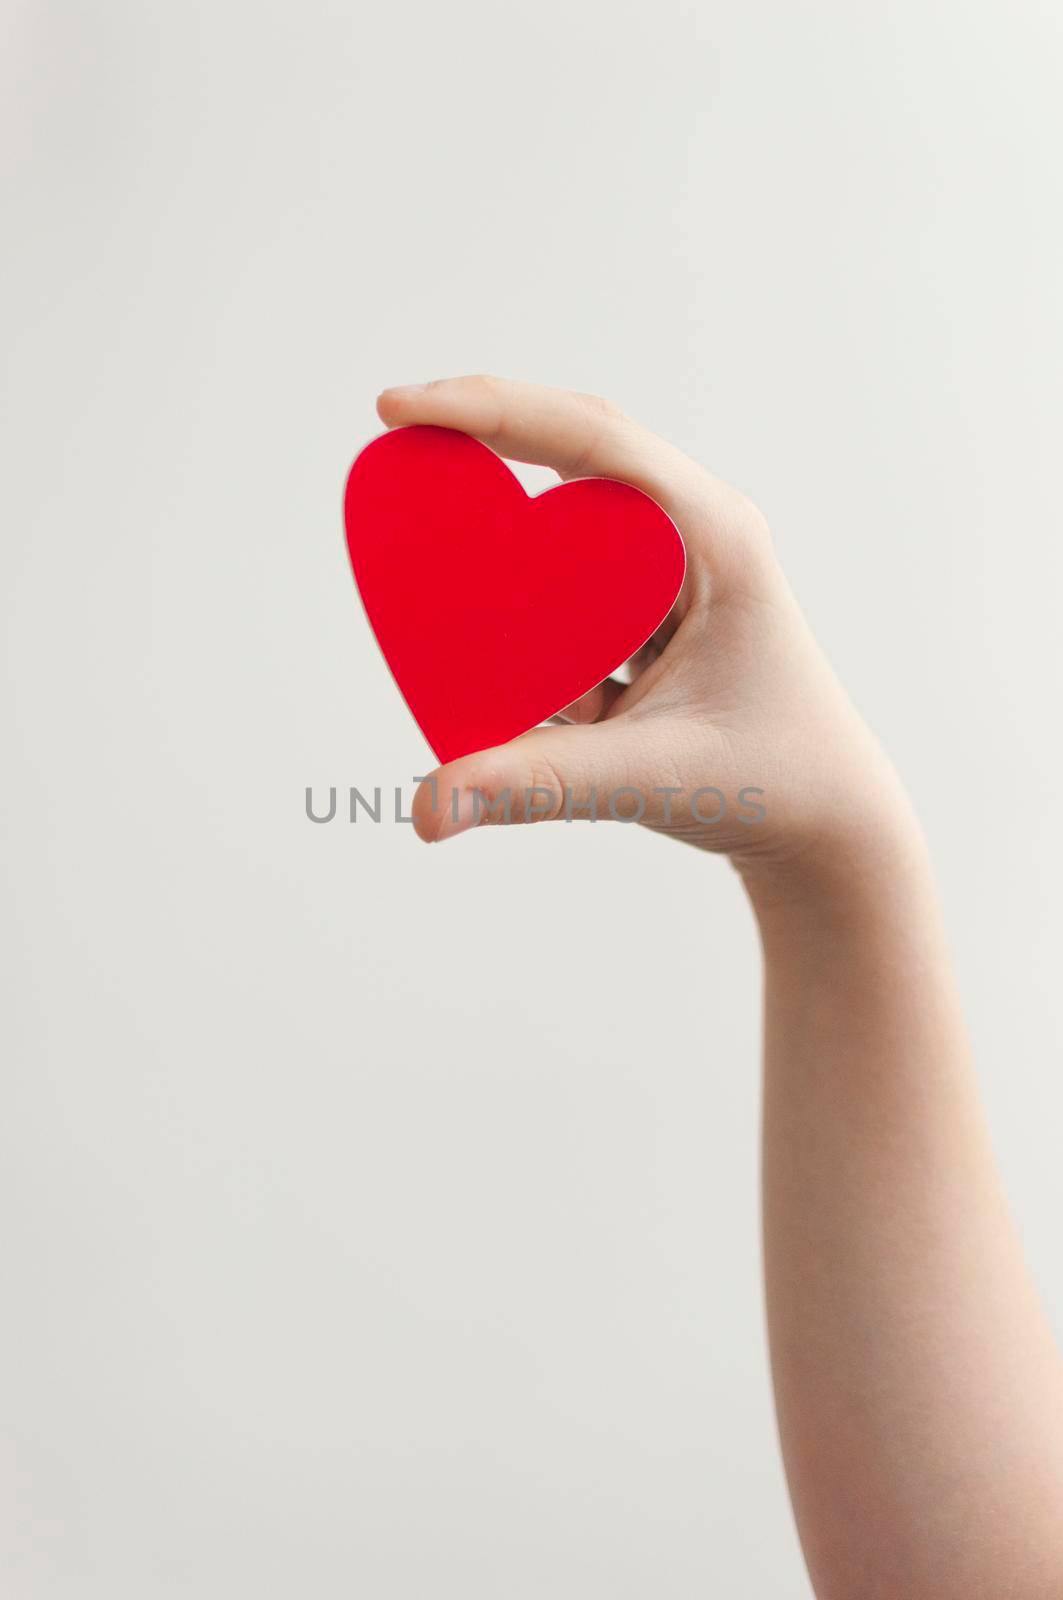 Baby's hand holding a red heart over white wall background 